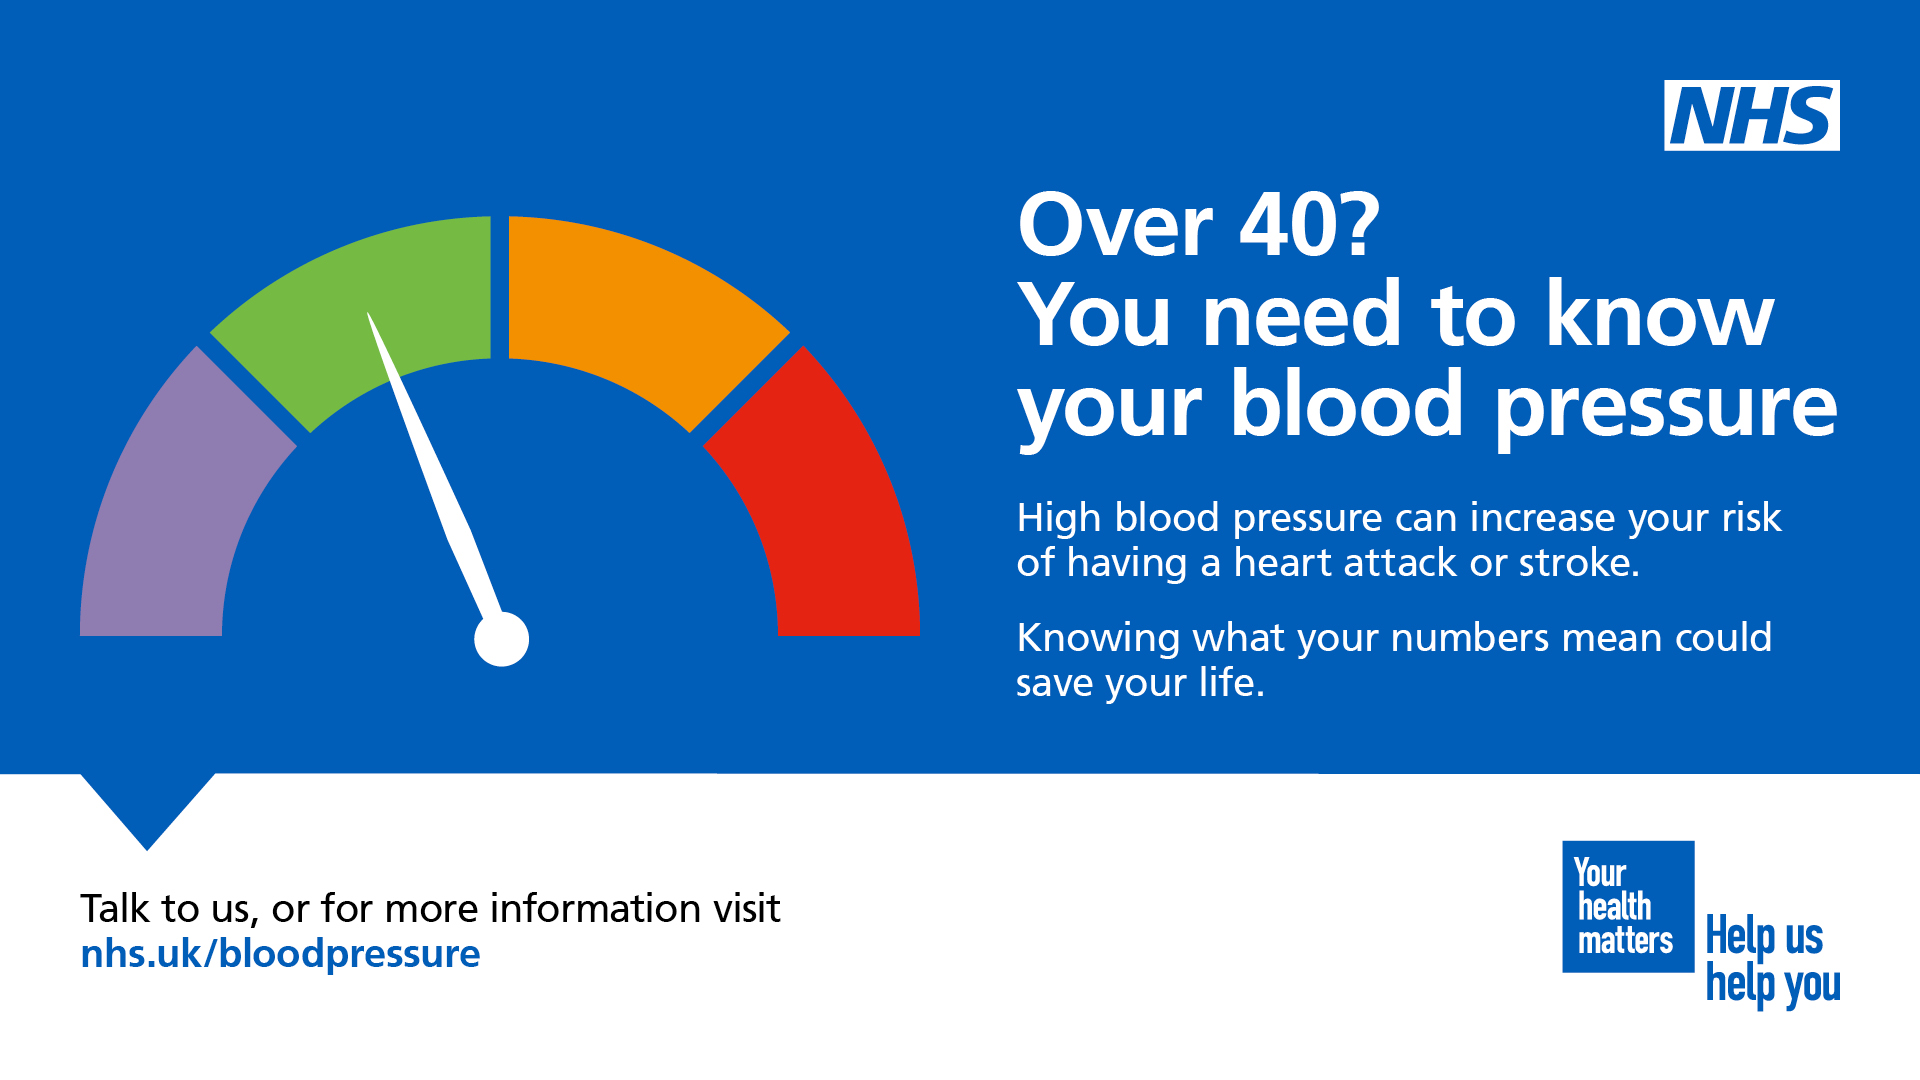 BLOOD PRESSURE CHECKS FOR OVER 40s